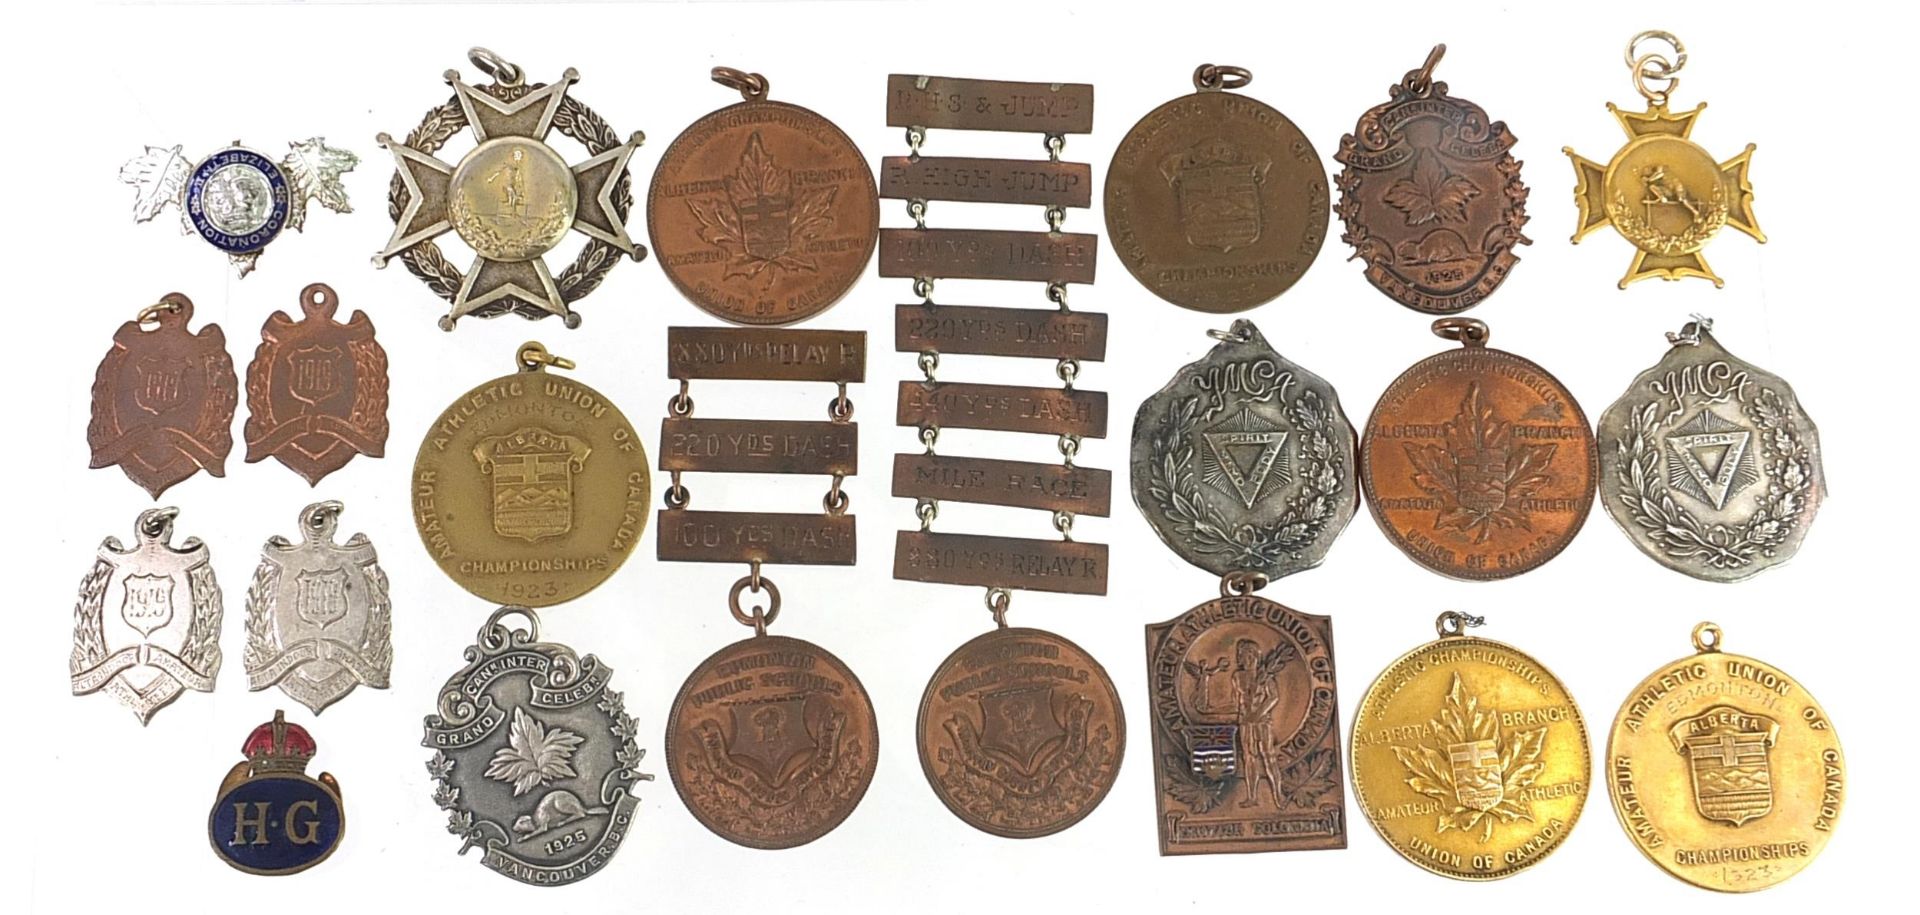 Predominantly athletic jewels and medallions, some silver including standing high jump awarded to